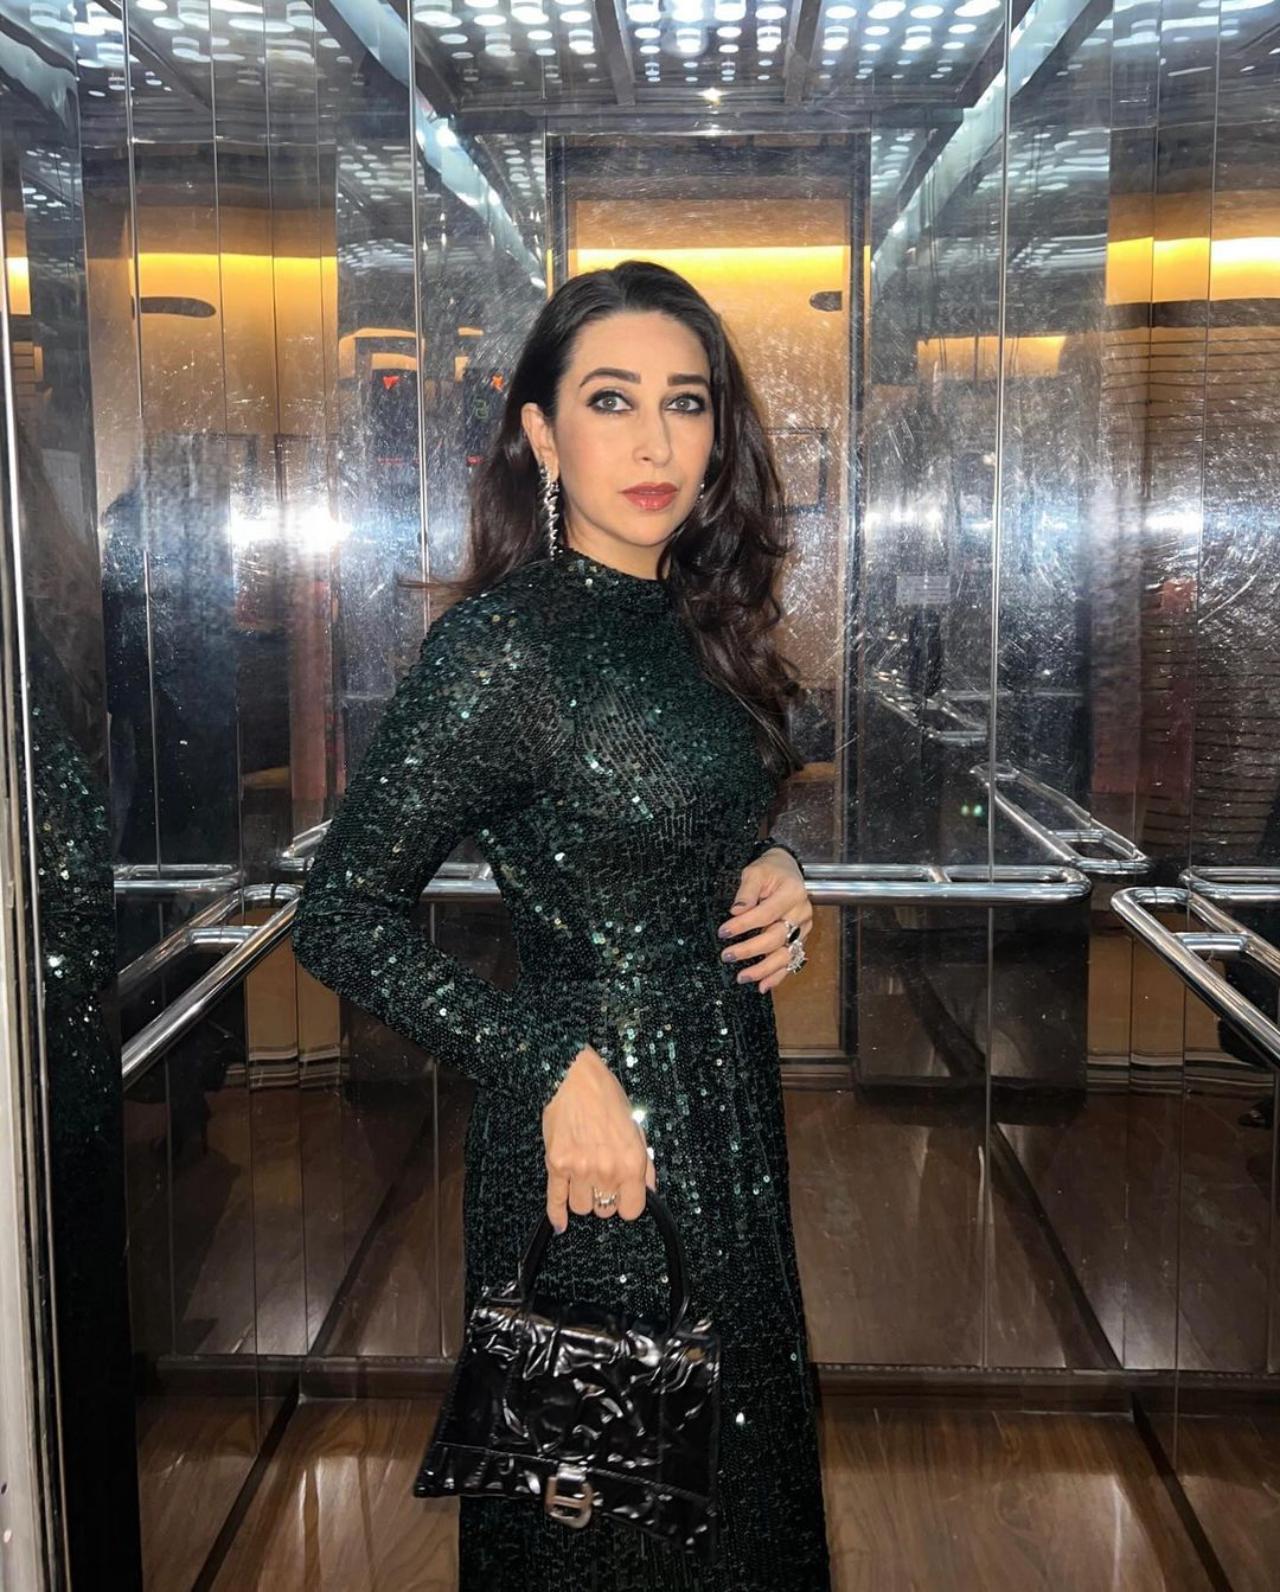 Karisma Kapoor opted for a shimmery green gown to dance the night away at her 'Dil Toh Pagal Hai' co-star's birthday